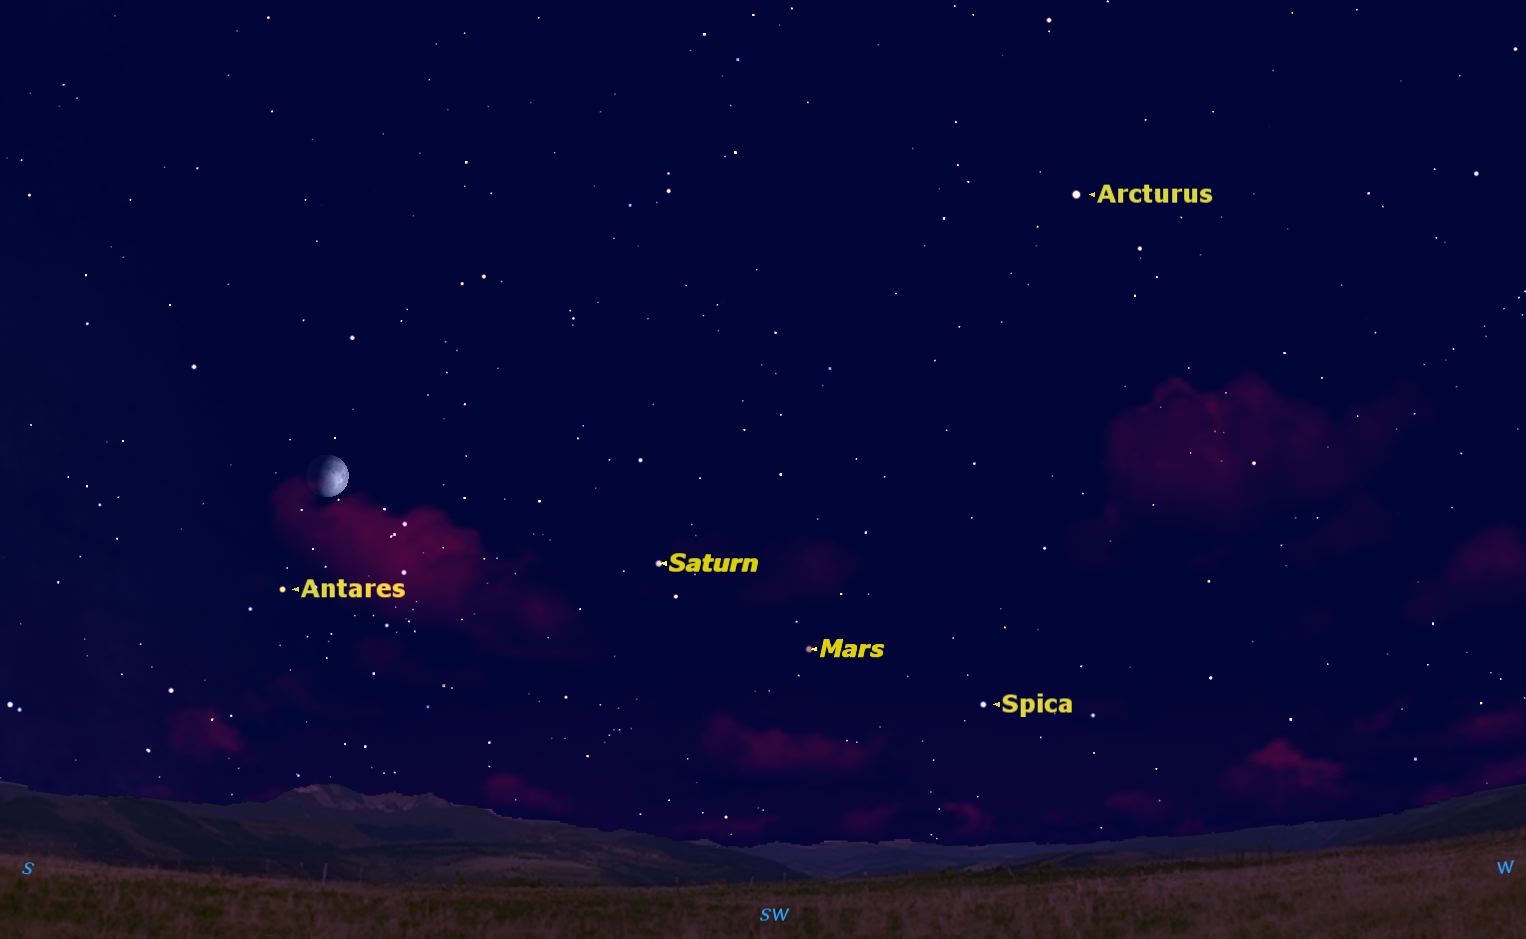 On August 5, the Moon is to the north of Antares. Credit: Starry Night software.